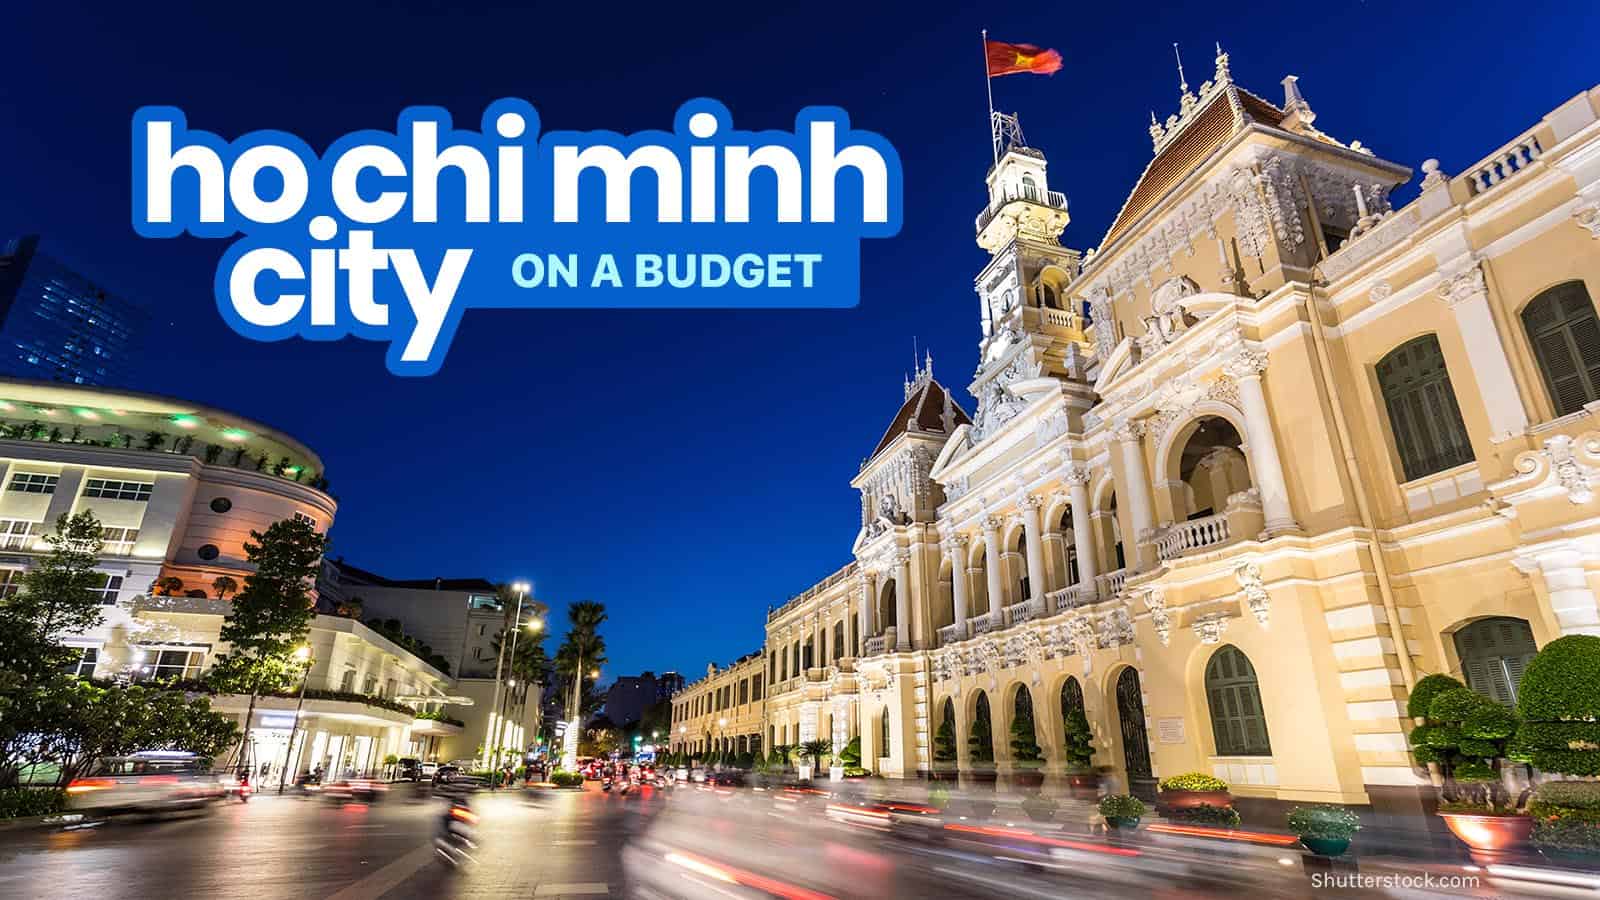 HO CHI MINH CITY Travel Guide: Budget, Itinerary, Things to Do